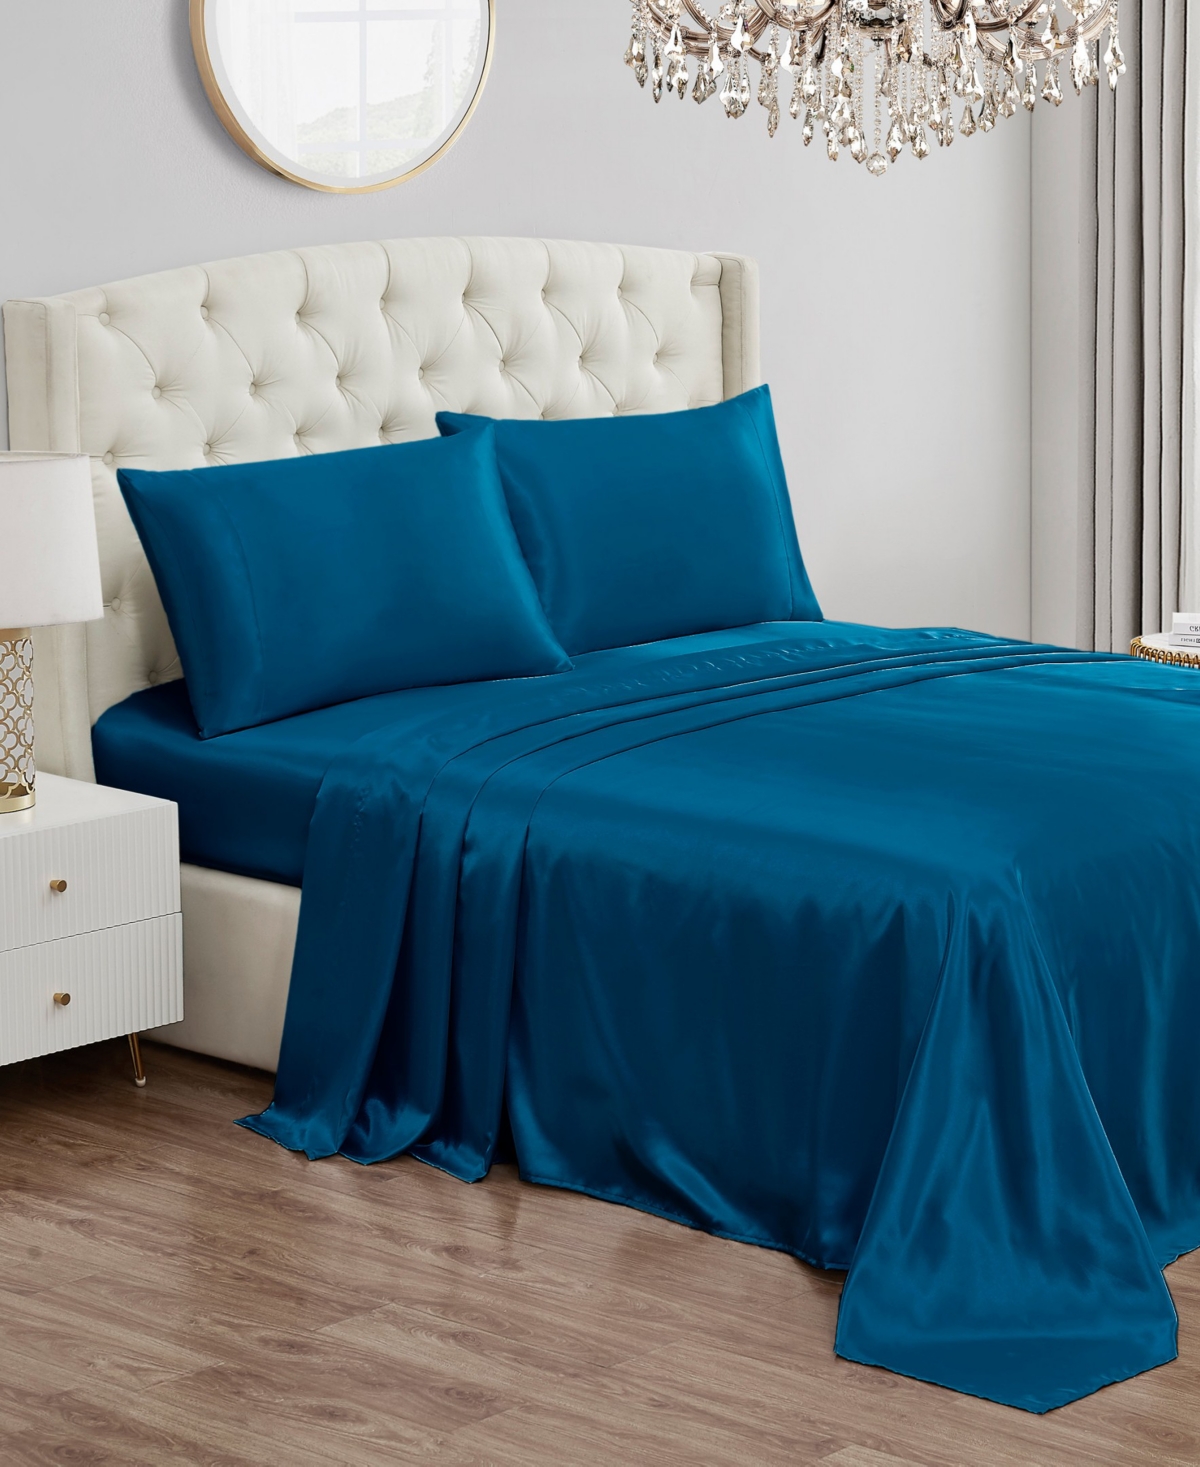 Juicy Couture Satin 3 Piece Sheet Set, Twin In Blue